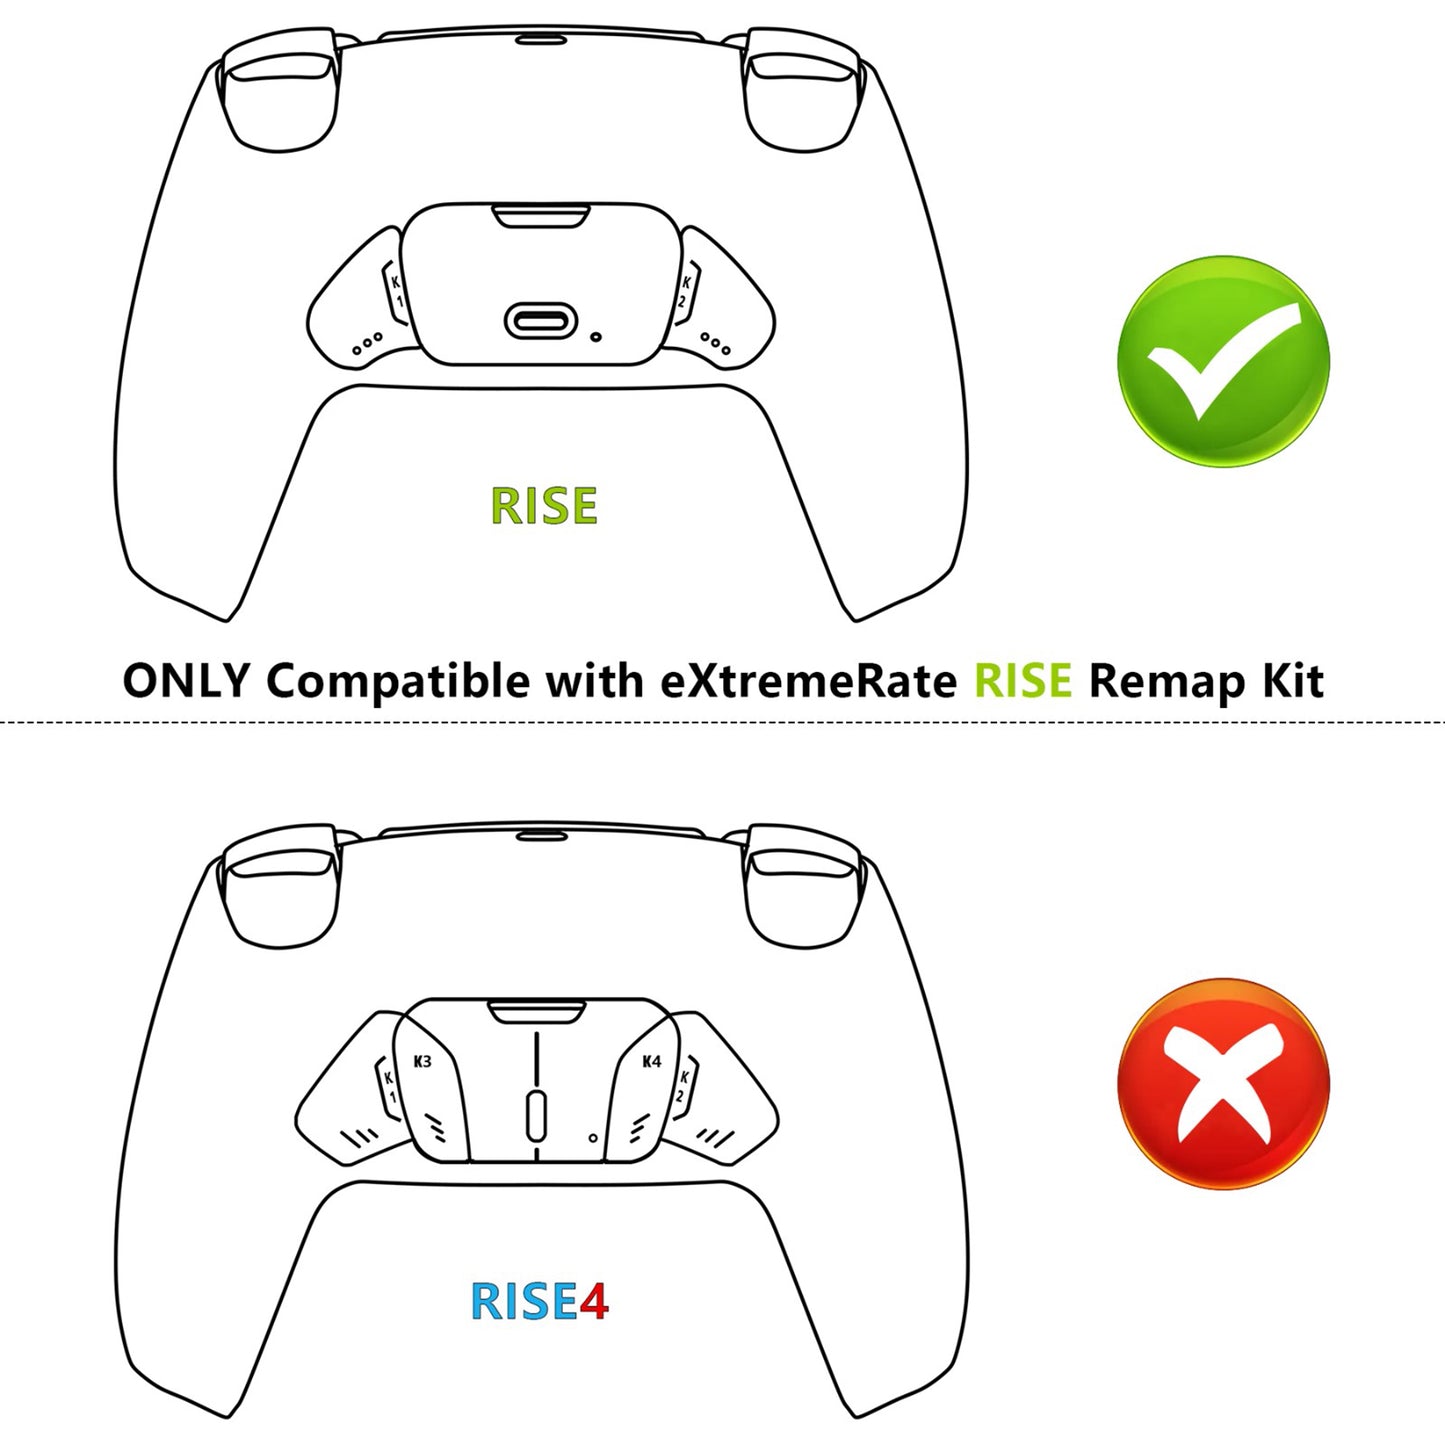 eXtremeRate Replacement Redesigned K1 K2 Back Buttons for eXtremerate RISE Remap Kit, Compatible with PS5 Controller - Nova Pink eXtremeRate